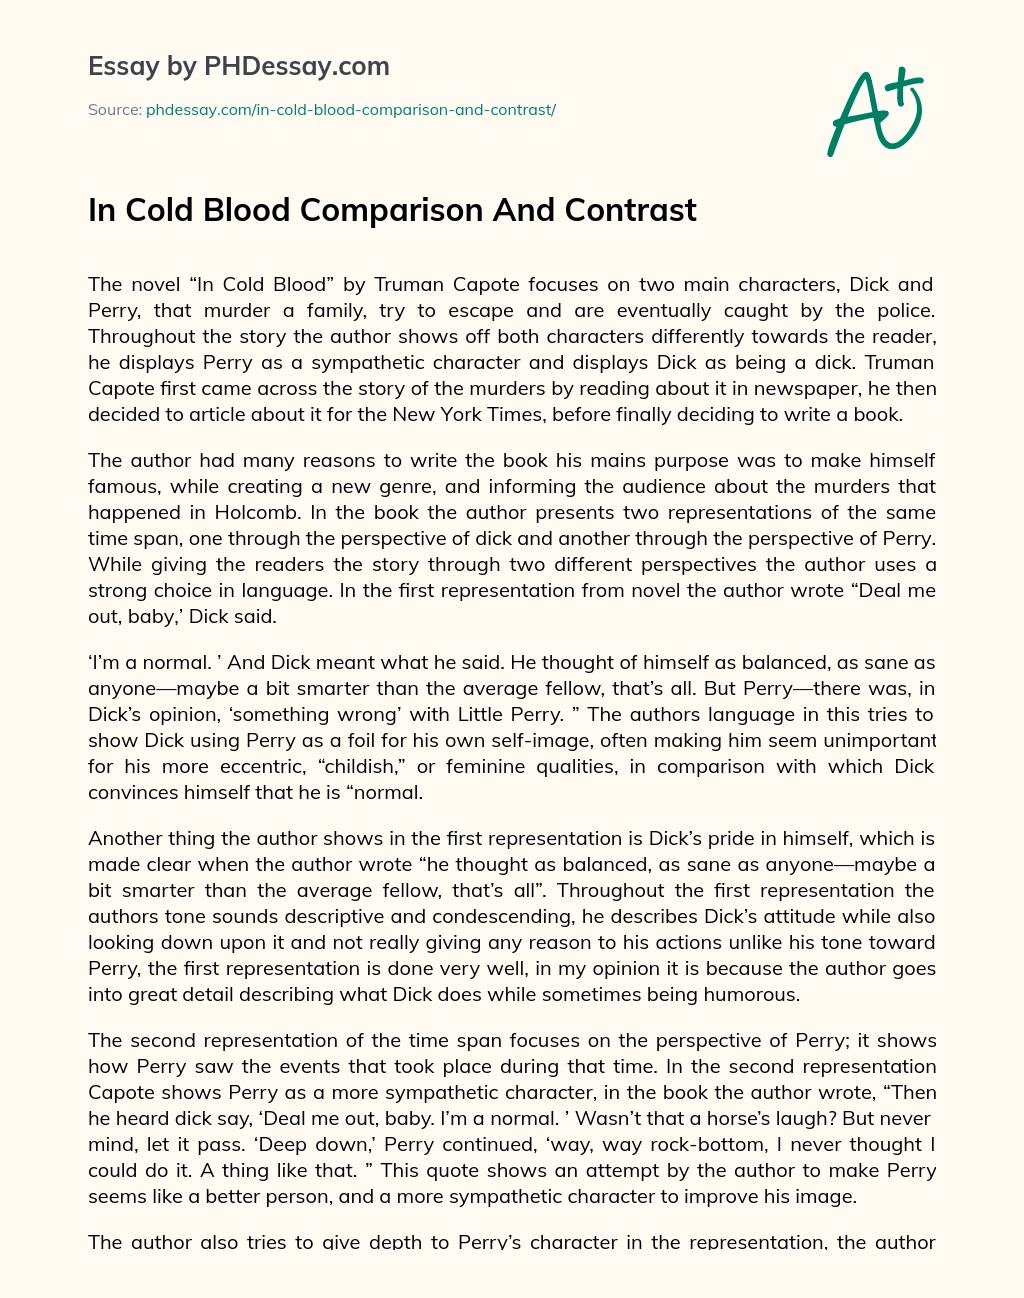 In Cold Blood Comparison And Contrast essay